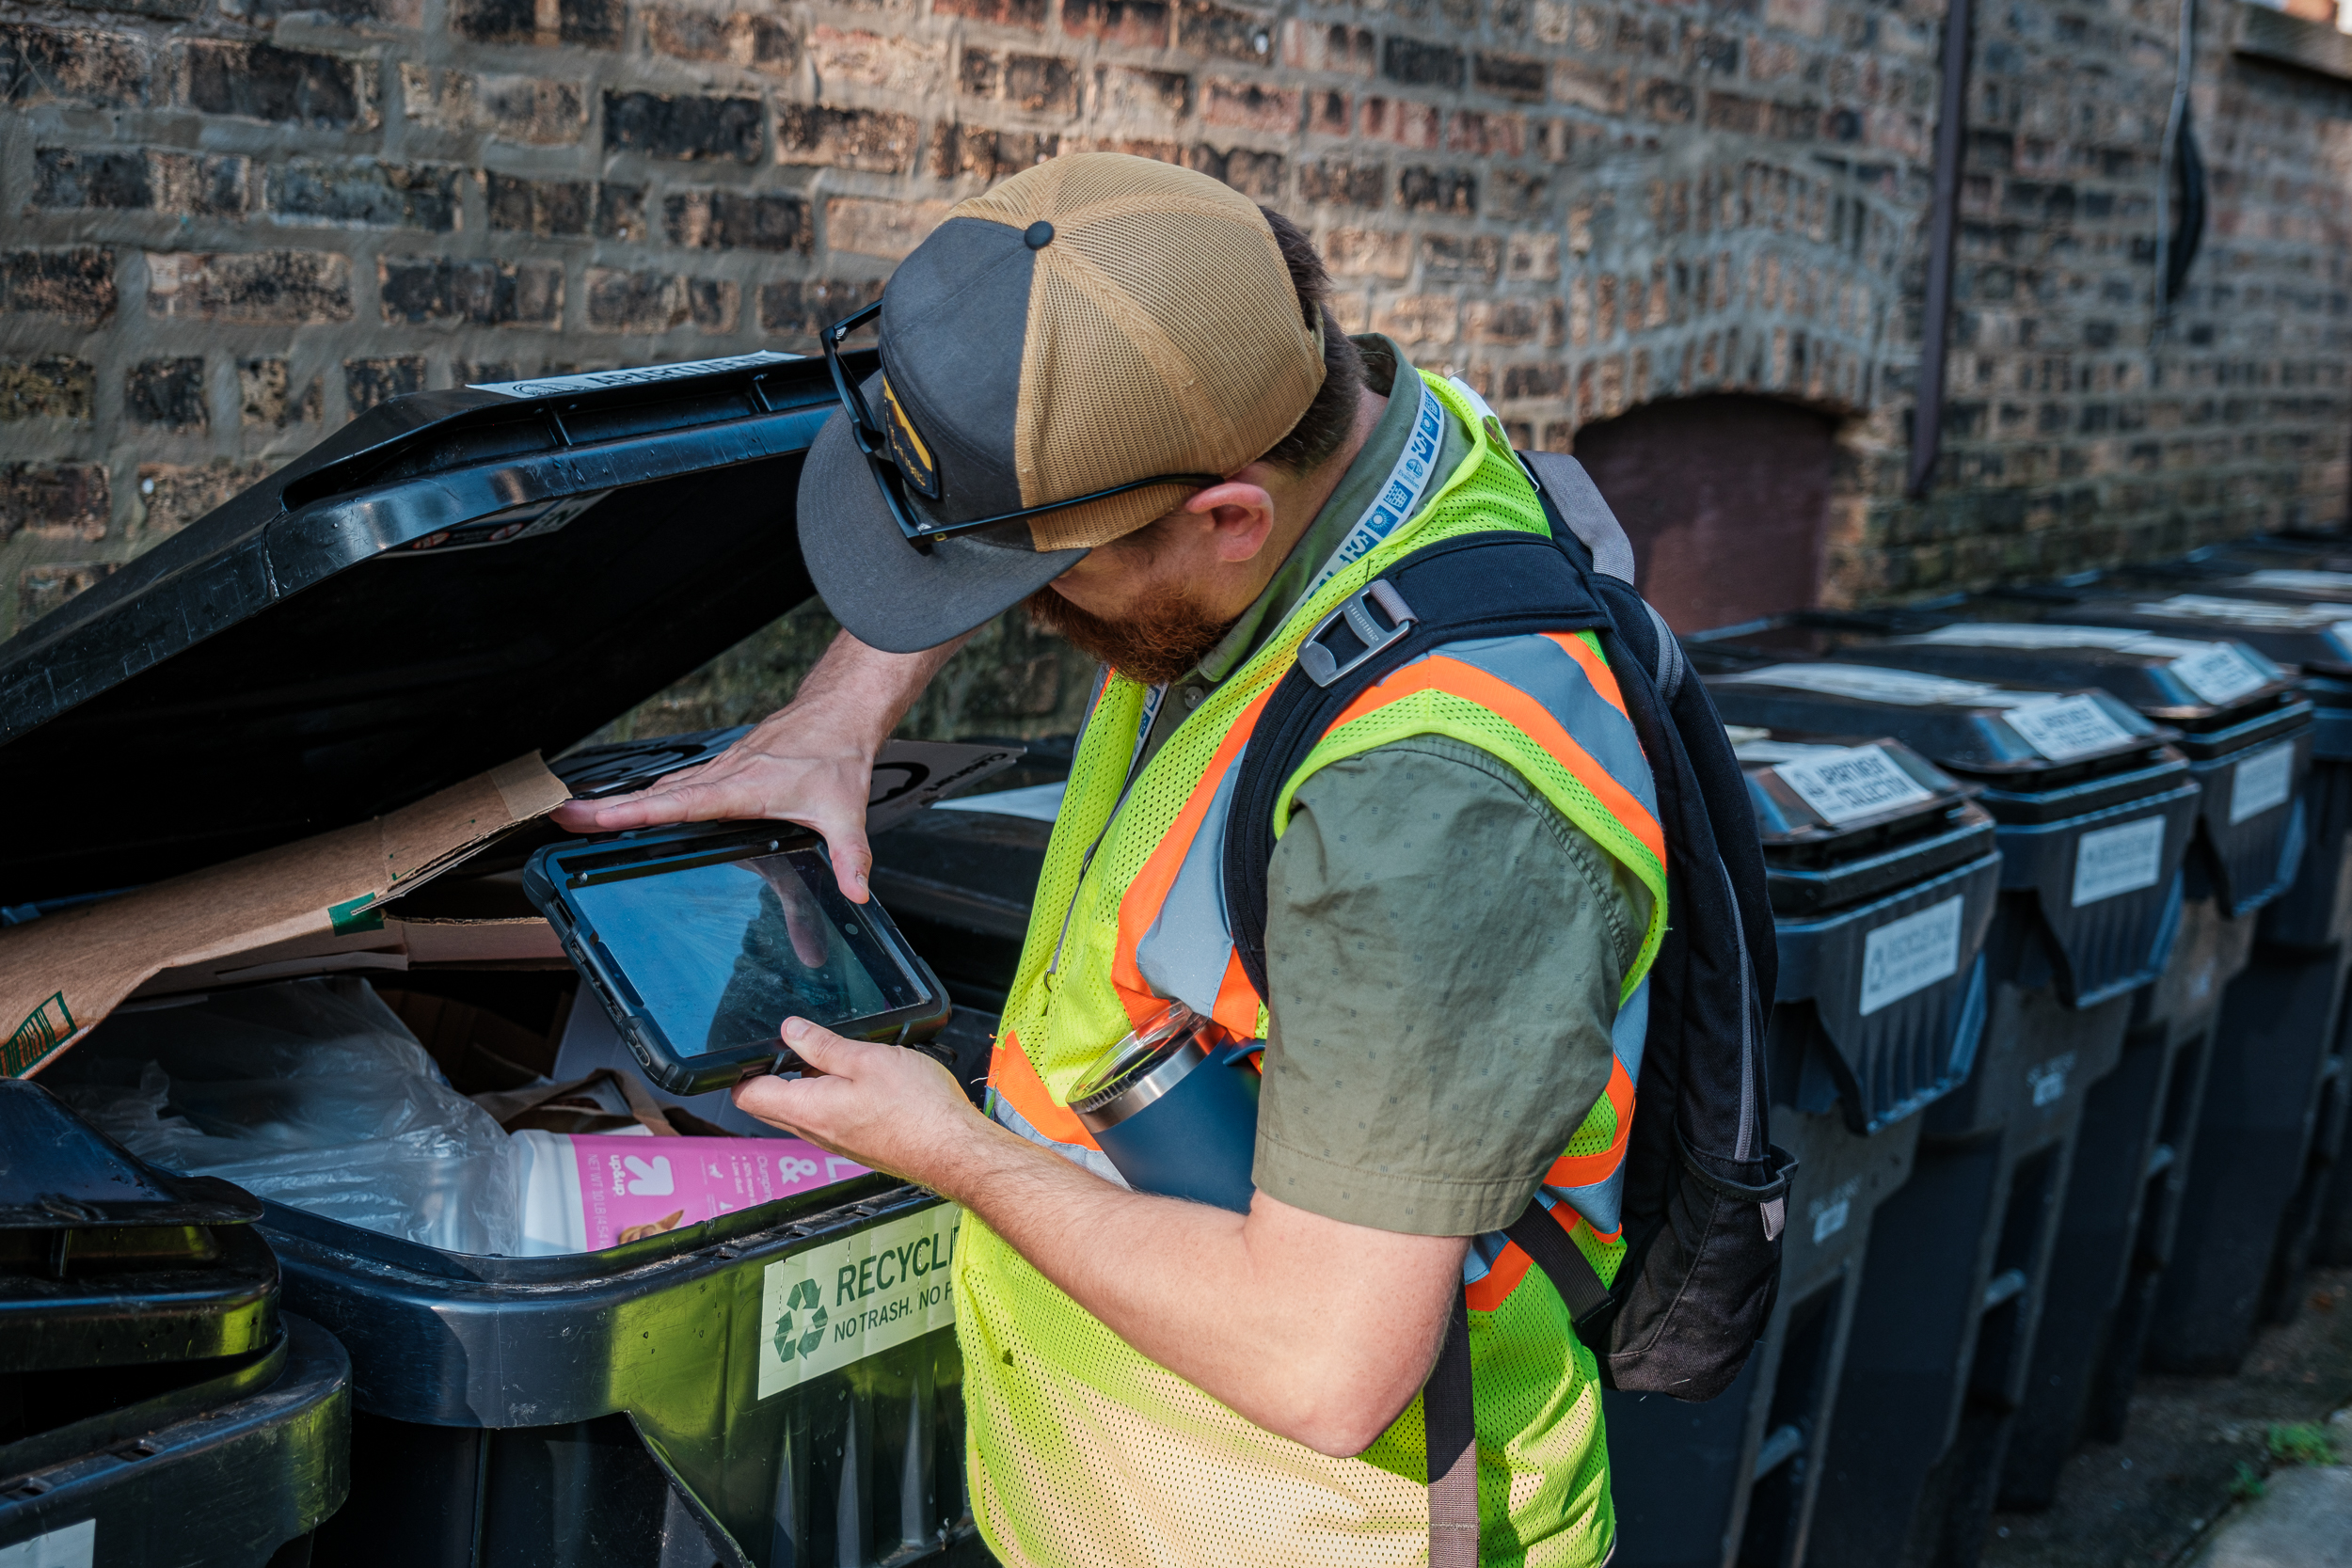 Annual recycling audit focuses on cart compliance